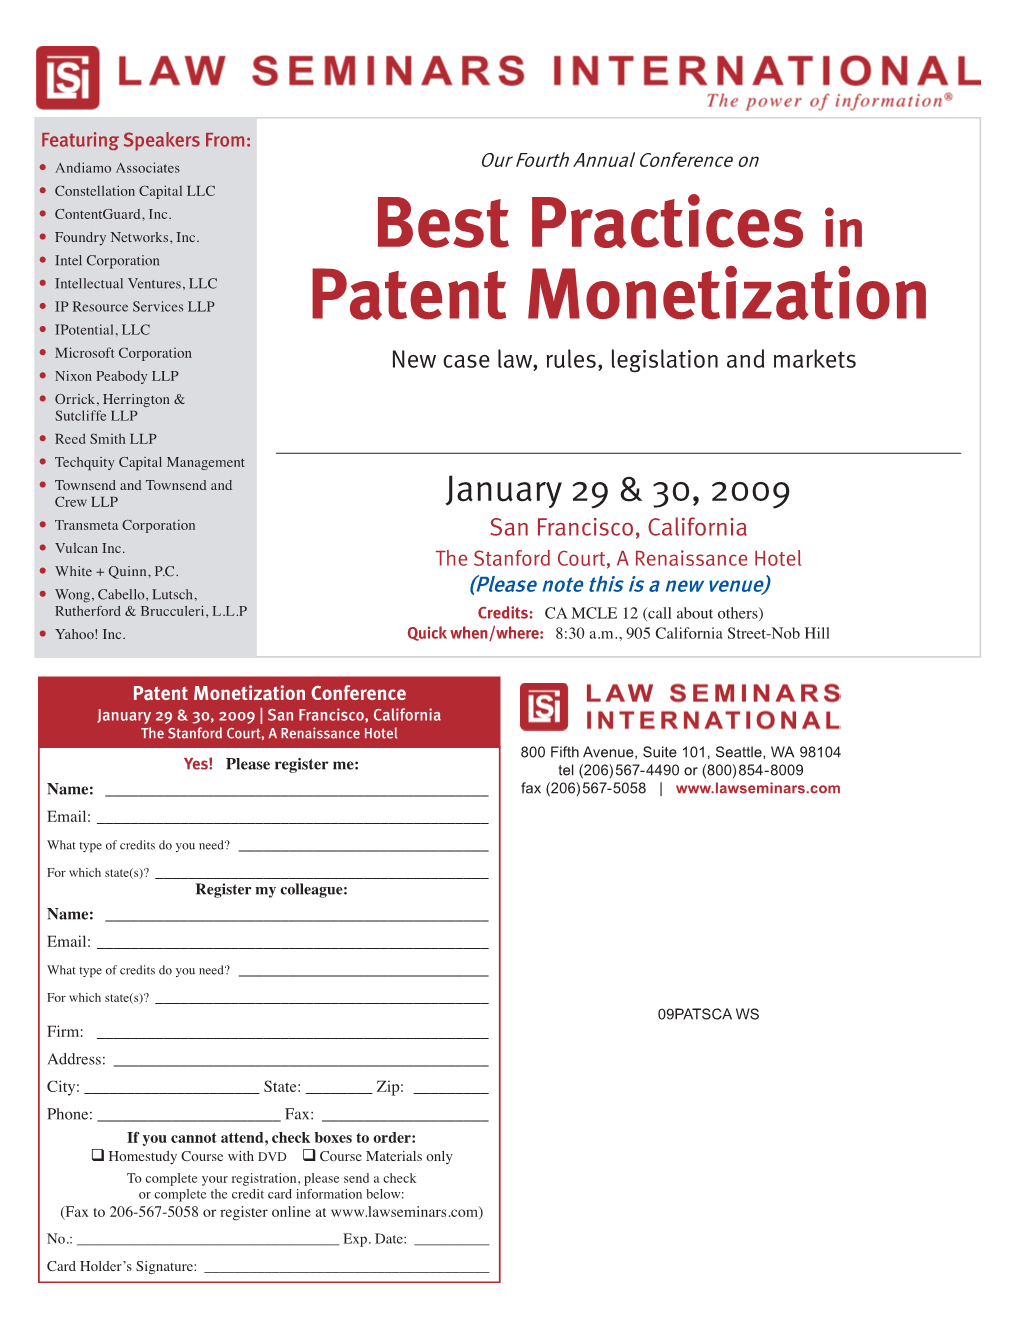 Best Practices in Patent Monetization